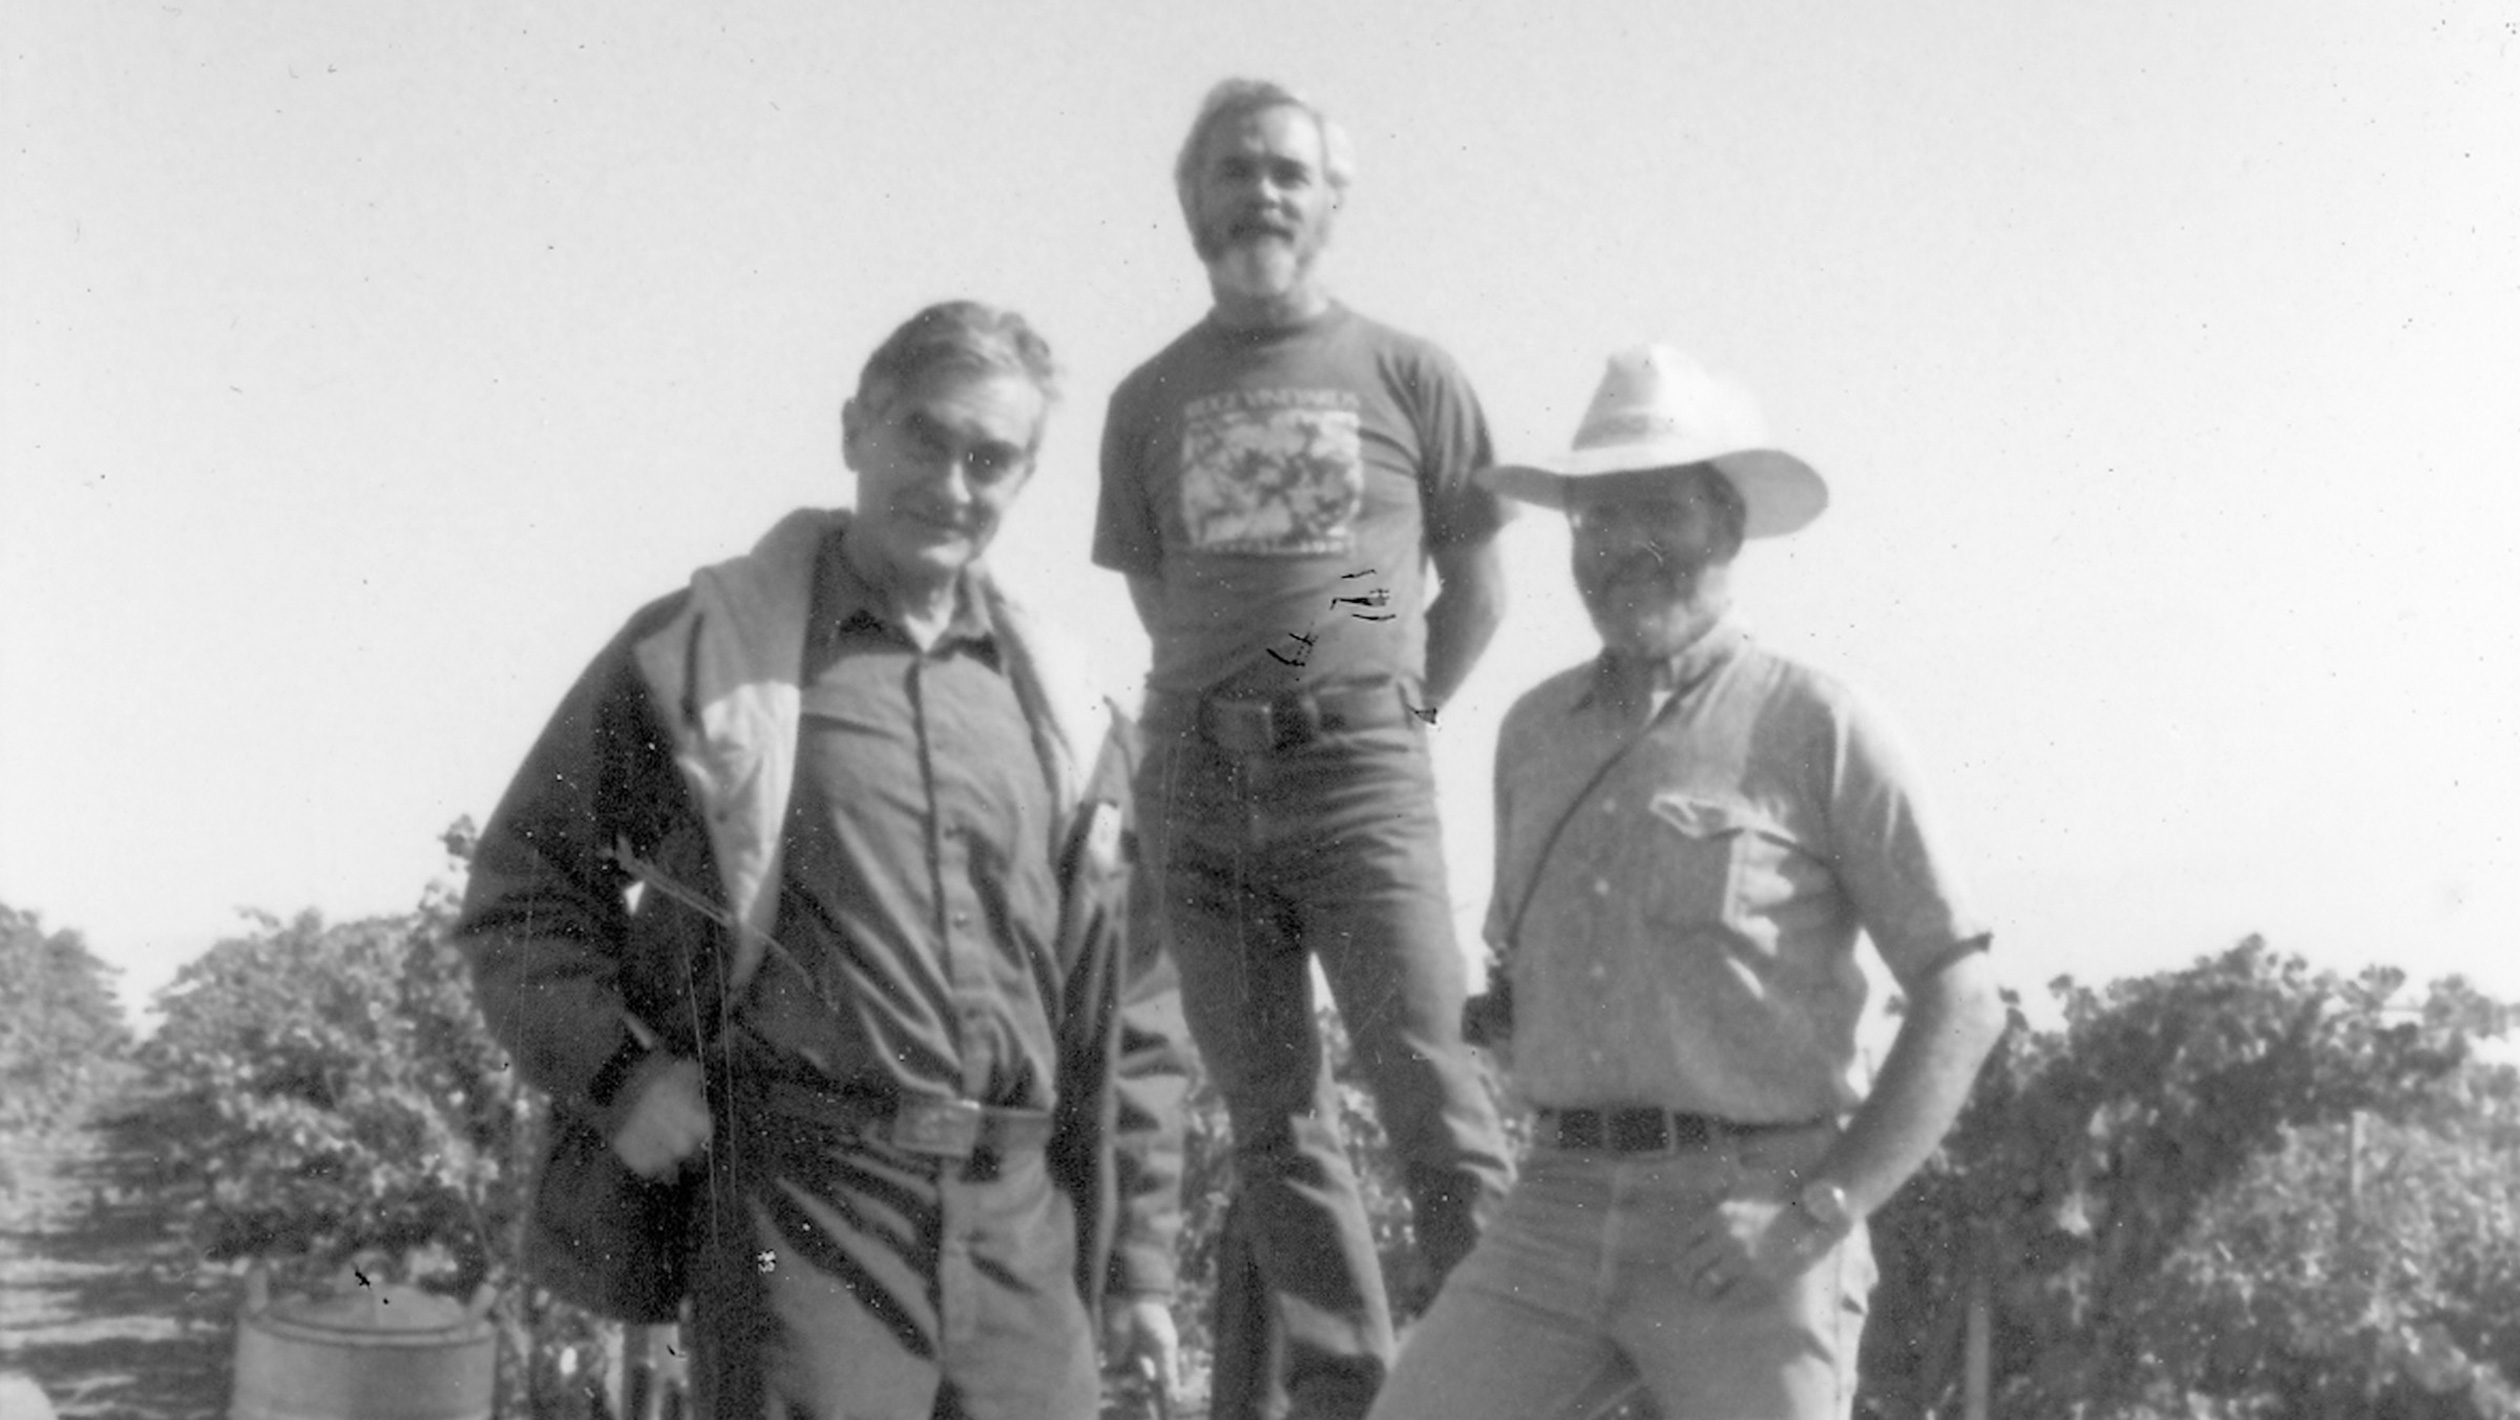 A decades-old black and white photo of three of the original founders of Ridge Vineyards